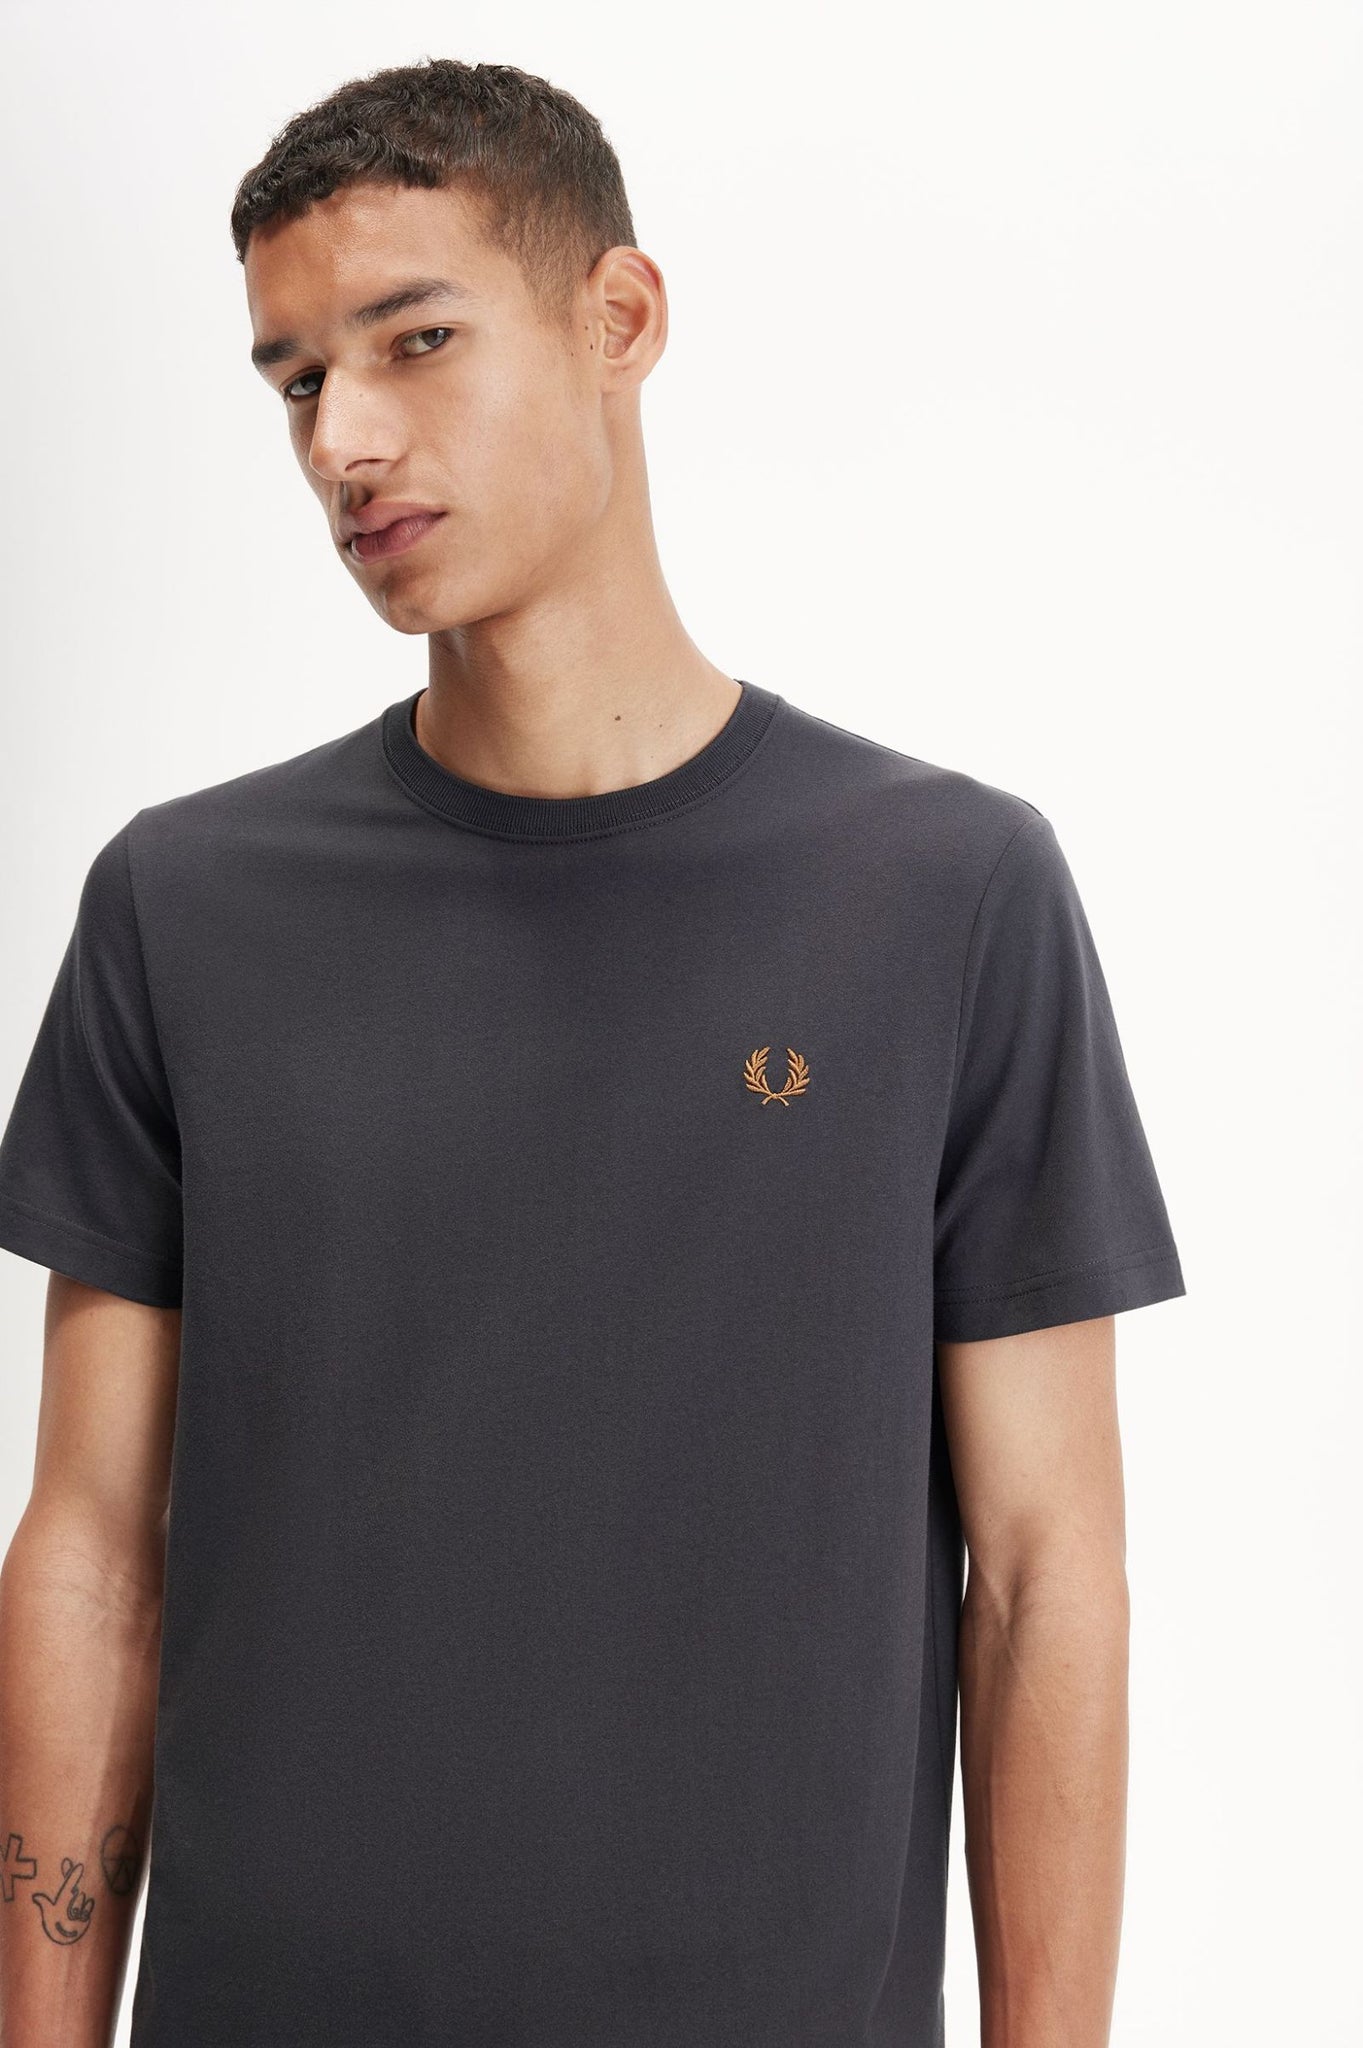 Camiseta Fred Perry M1600 Gris Ancla Caramelo Oscuro